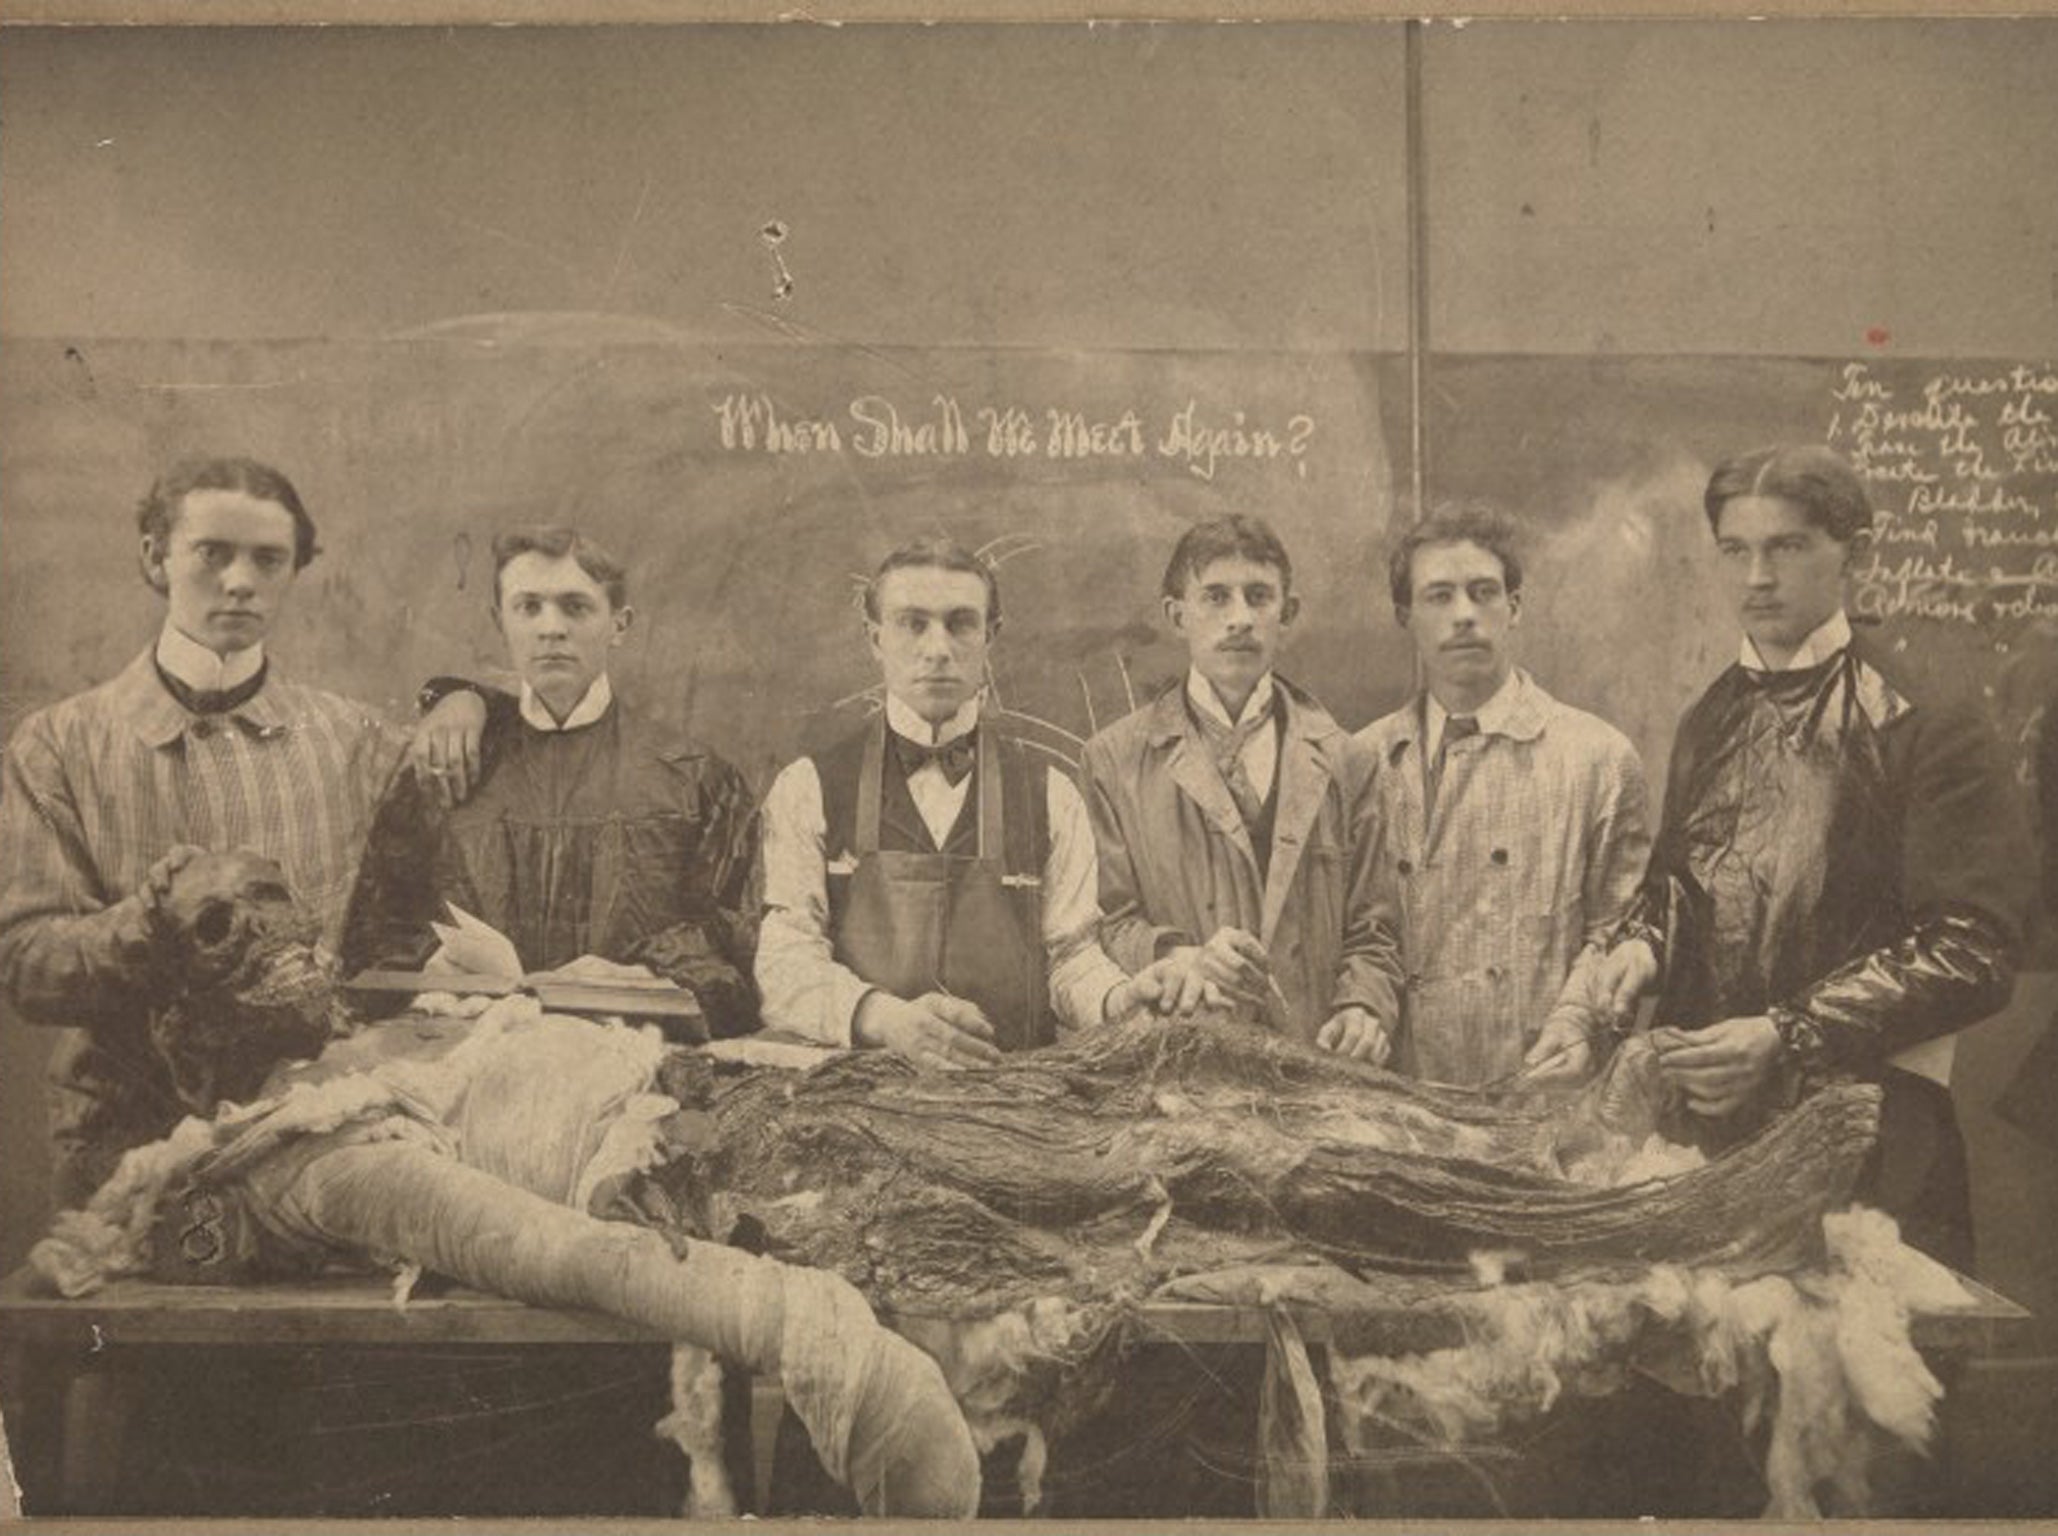 Victorian medical students learn to make light of death